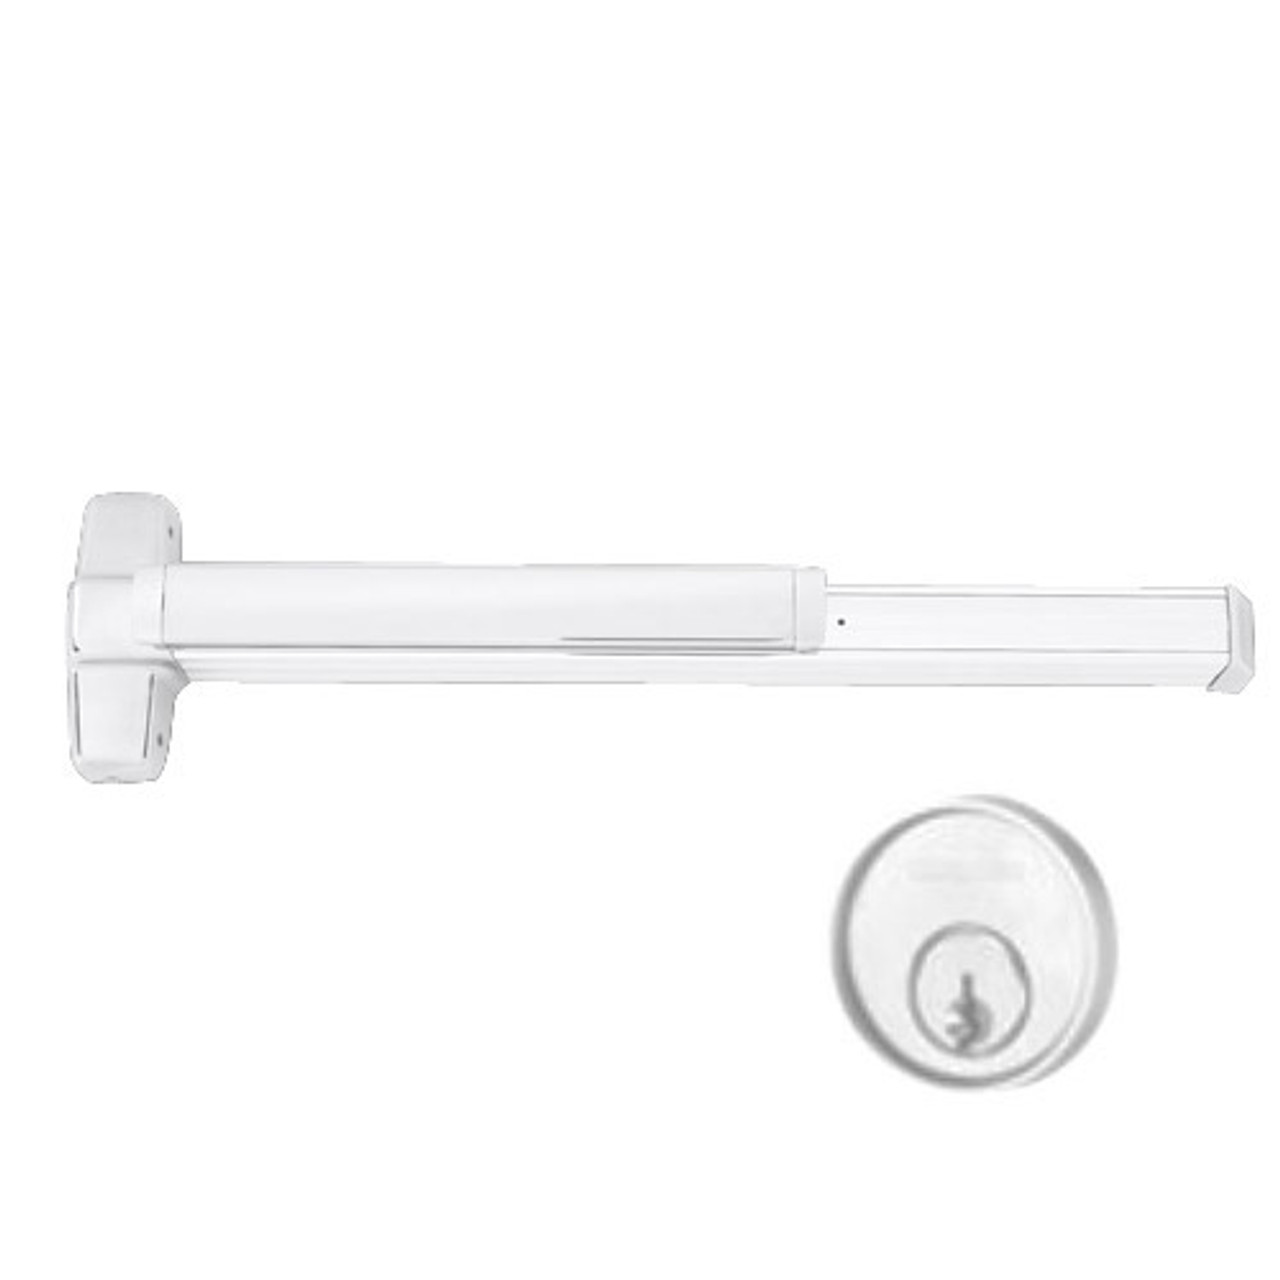 QEL9847WDC-NL-OP-US26-4 Von Duprin Exit Device with Quiet Electric Latch in Bright Chrome